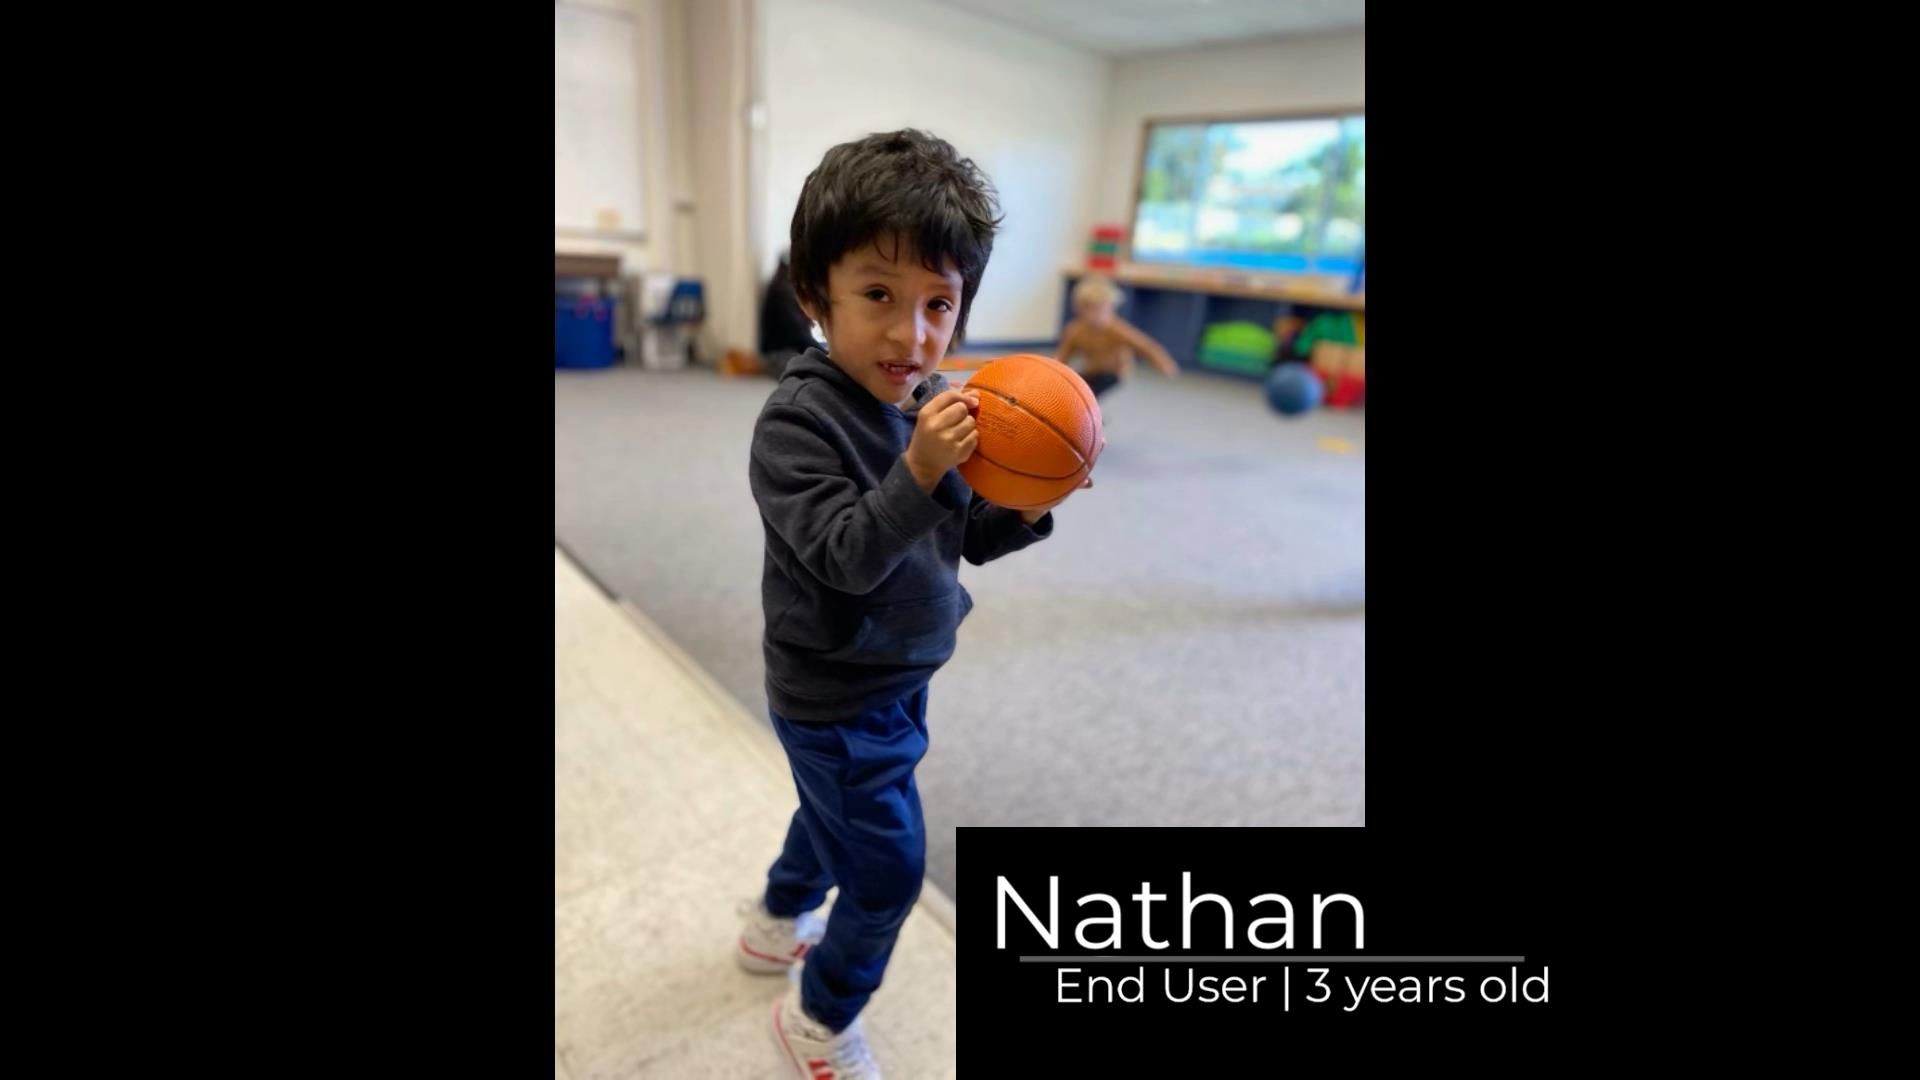 Nathan, 3 year old boy holding a small orange basketball.